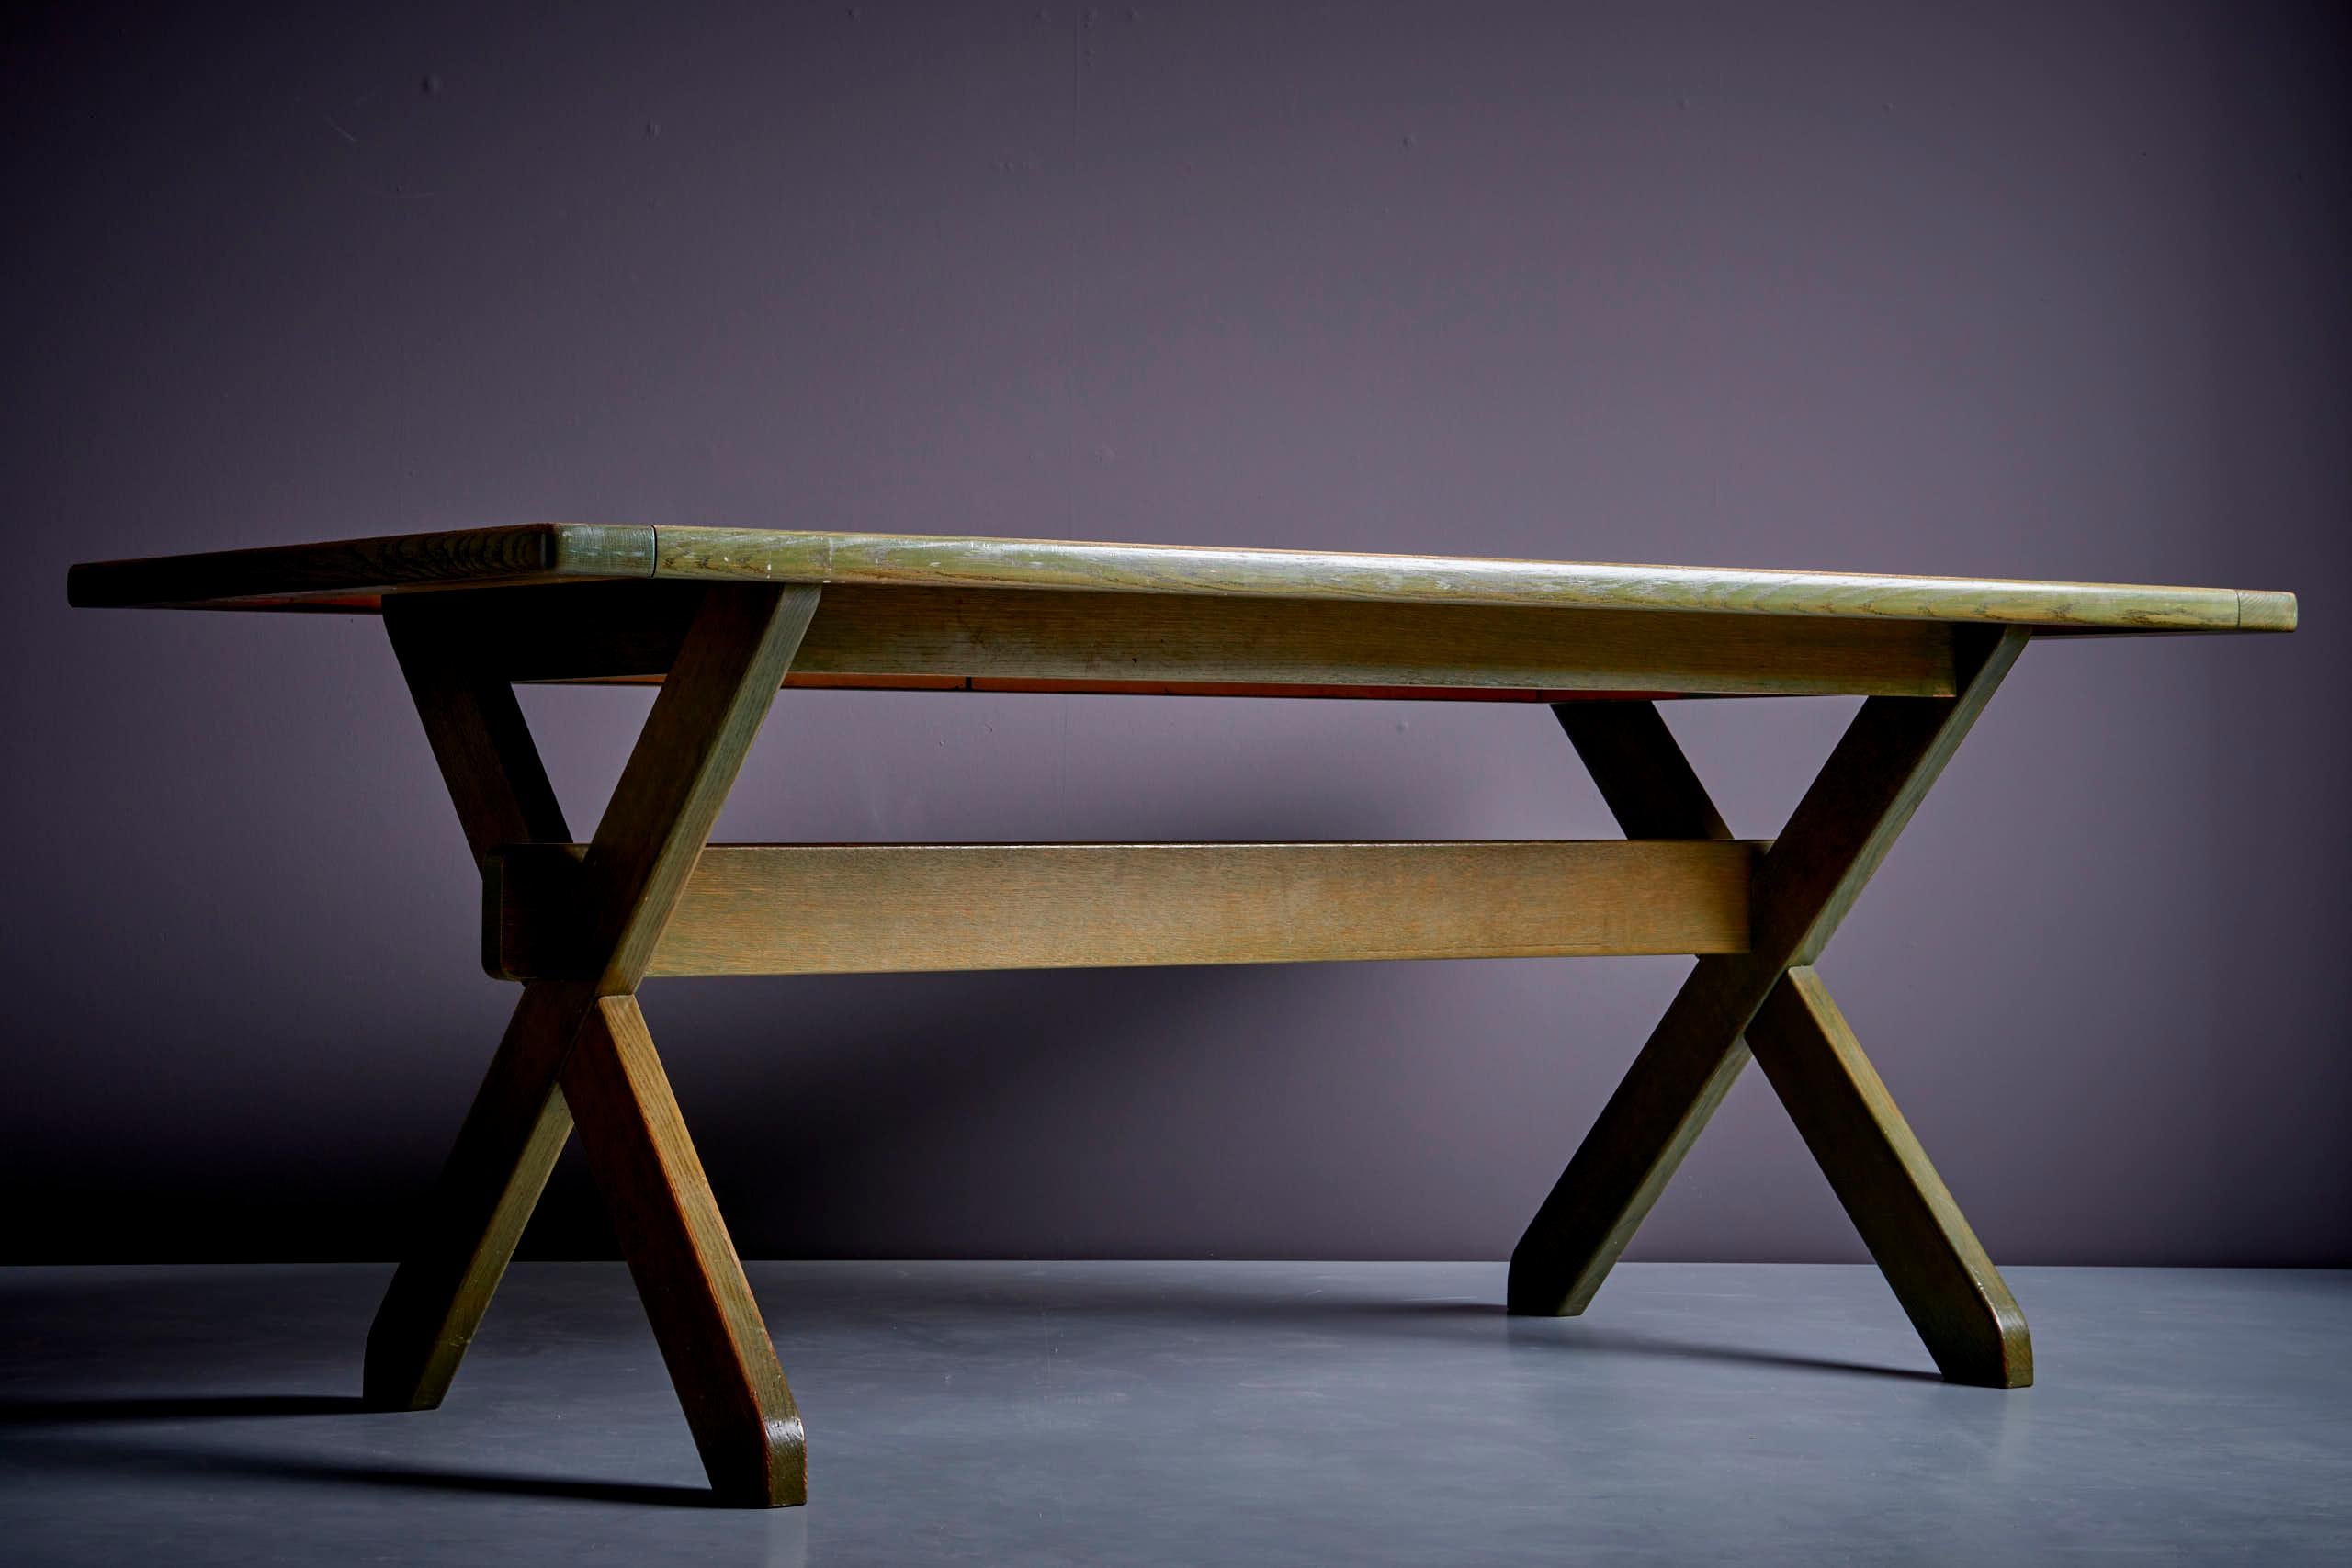 WK International Dining Table in Green Pine Wood, Germany - 1960s.